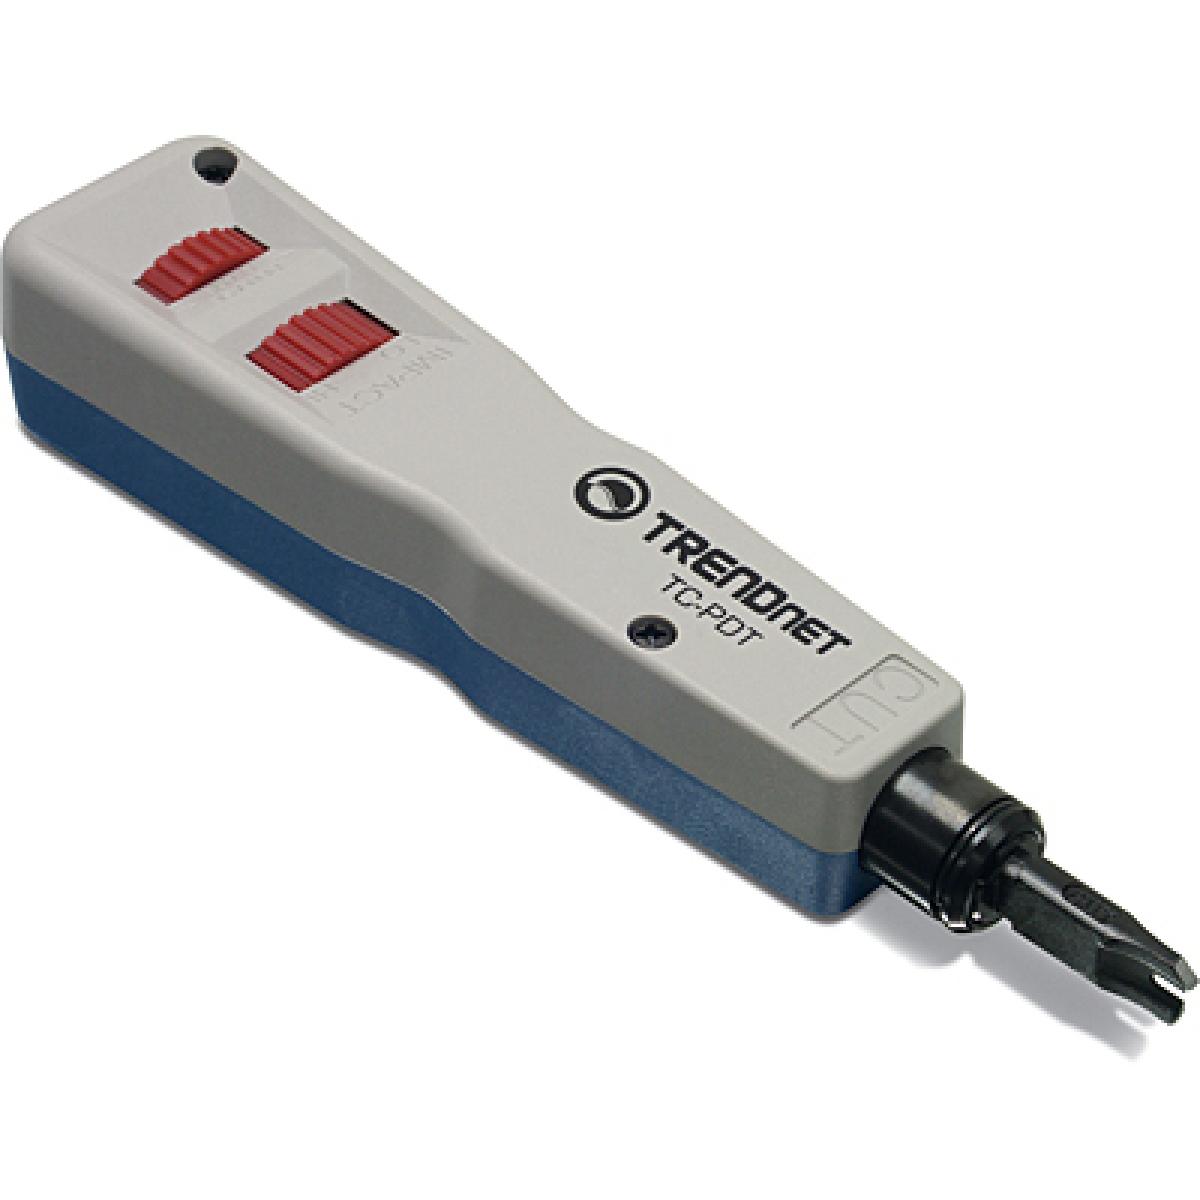 Trendnet Professional Punch Down Tool